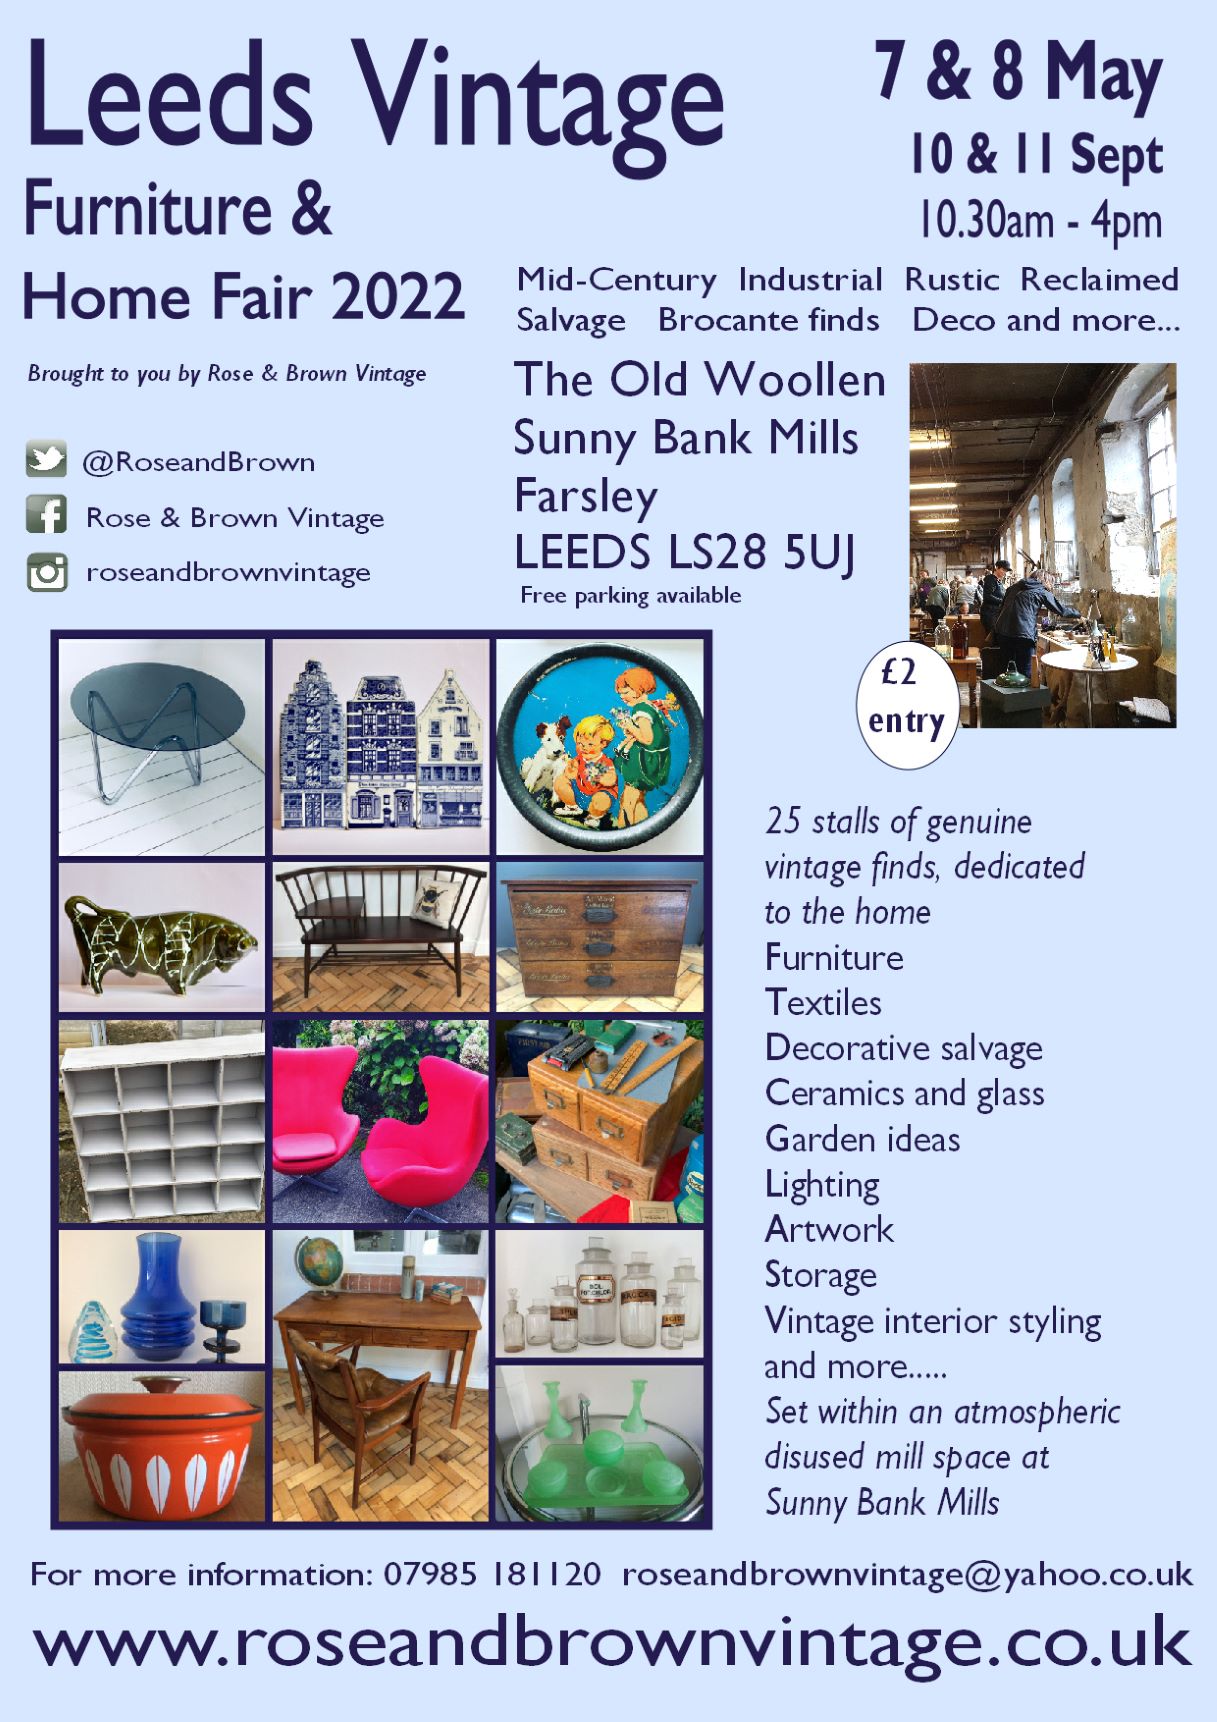 click here to view our Advance tickets for Leeds Vintage Furniture & Home Fair Sat 10 & Sun 11 September 2022 section